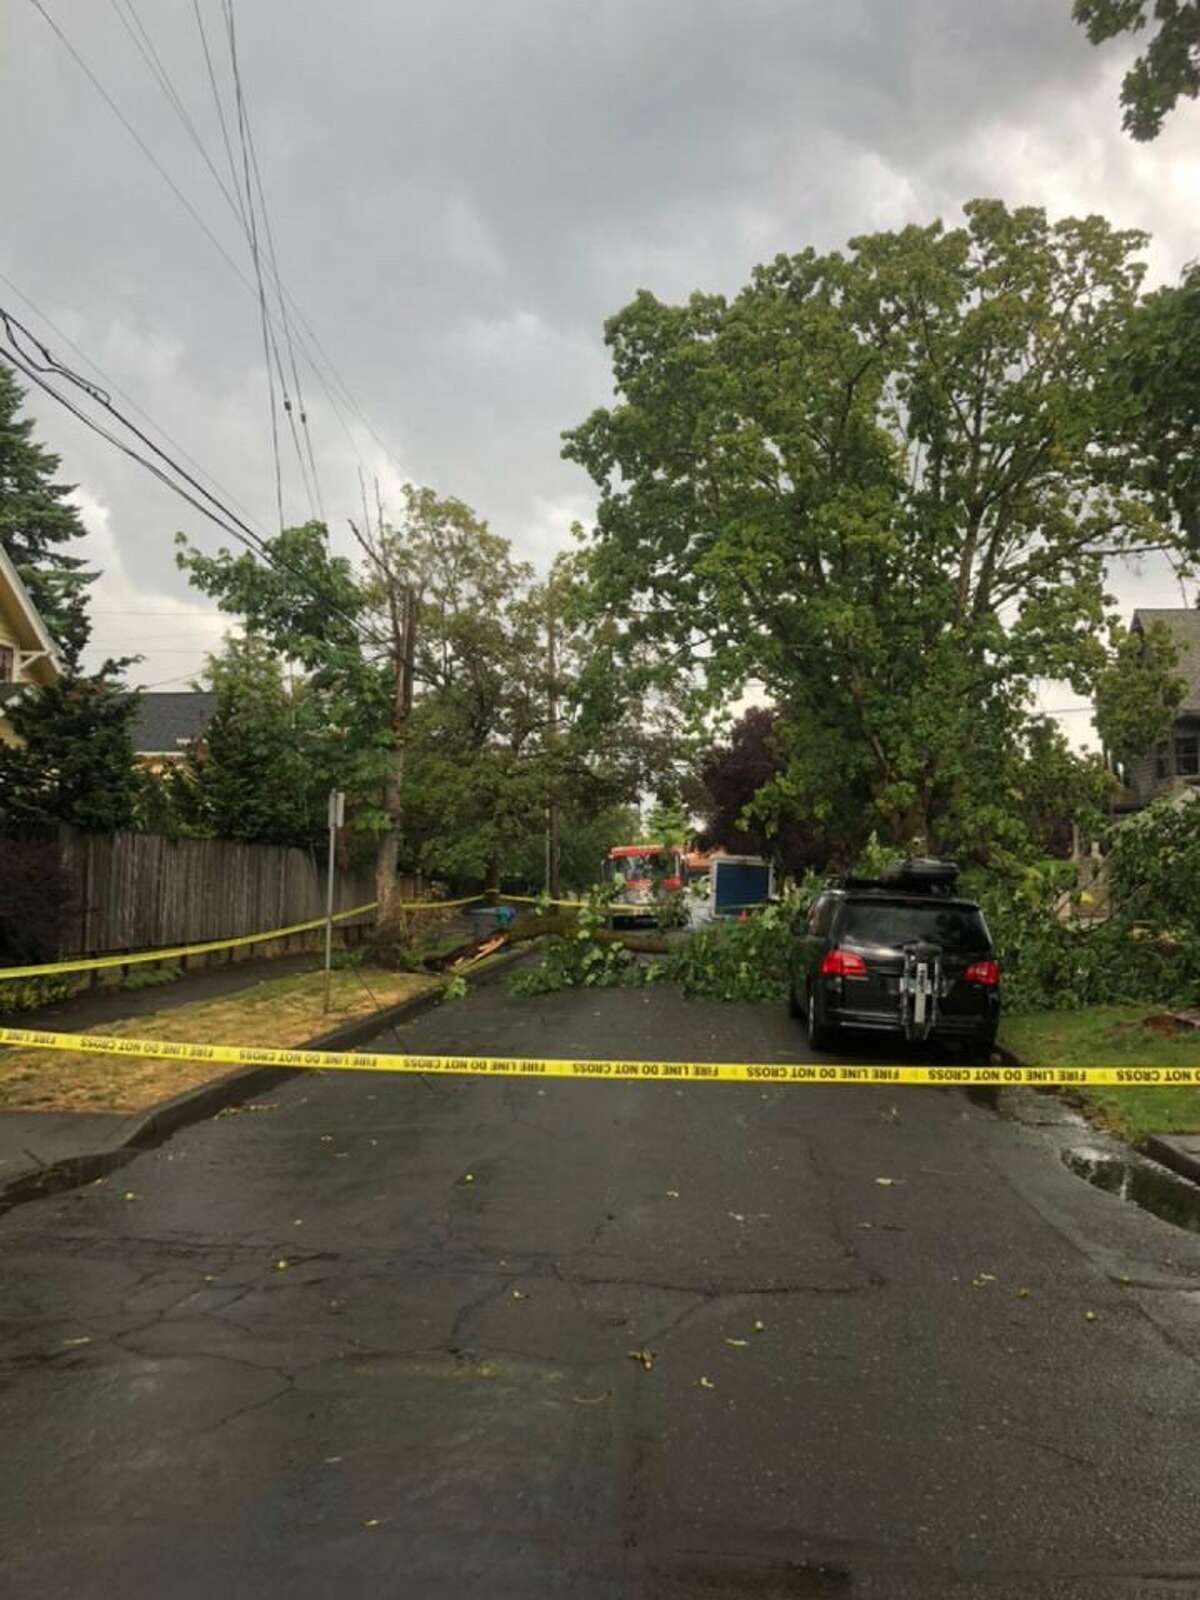 Rare tornado touches down in Portland, Oregon, damaging homes and trees